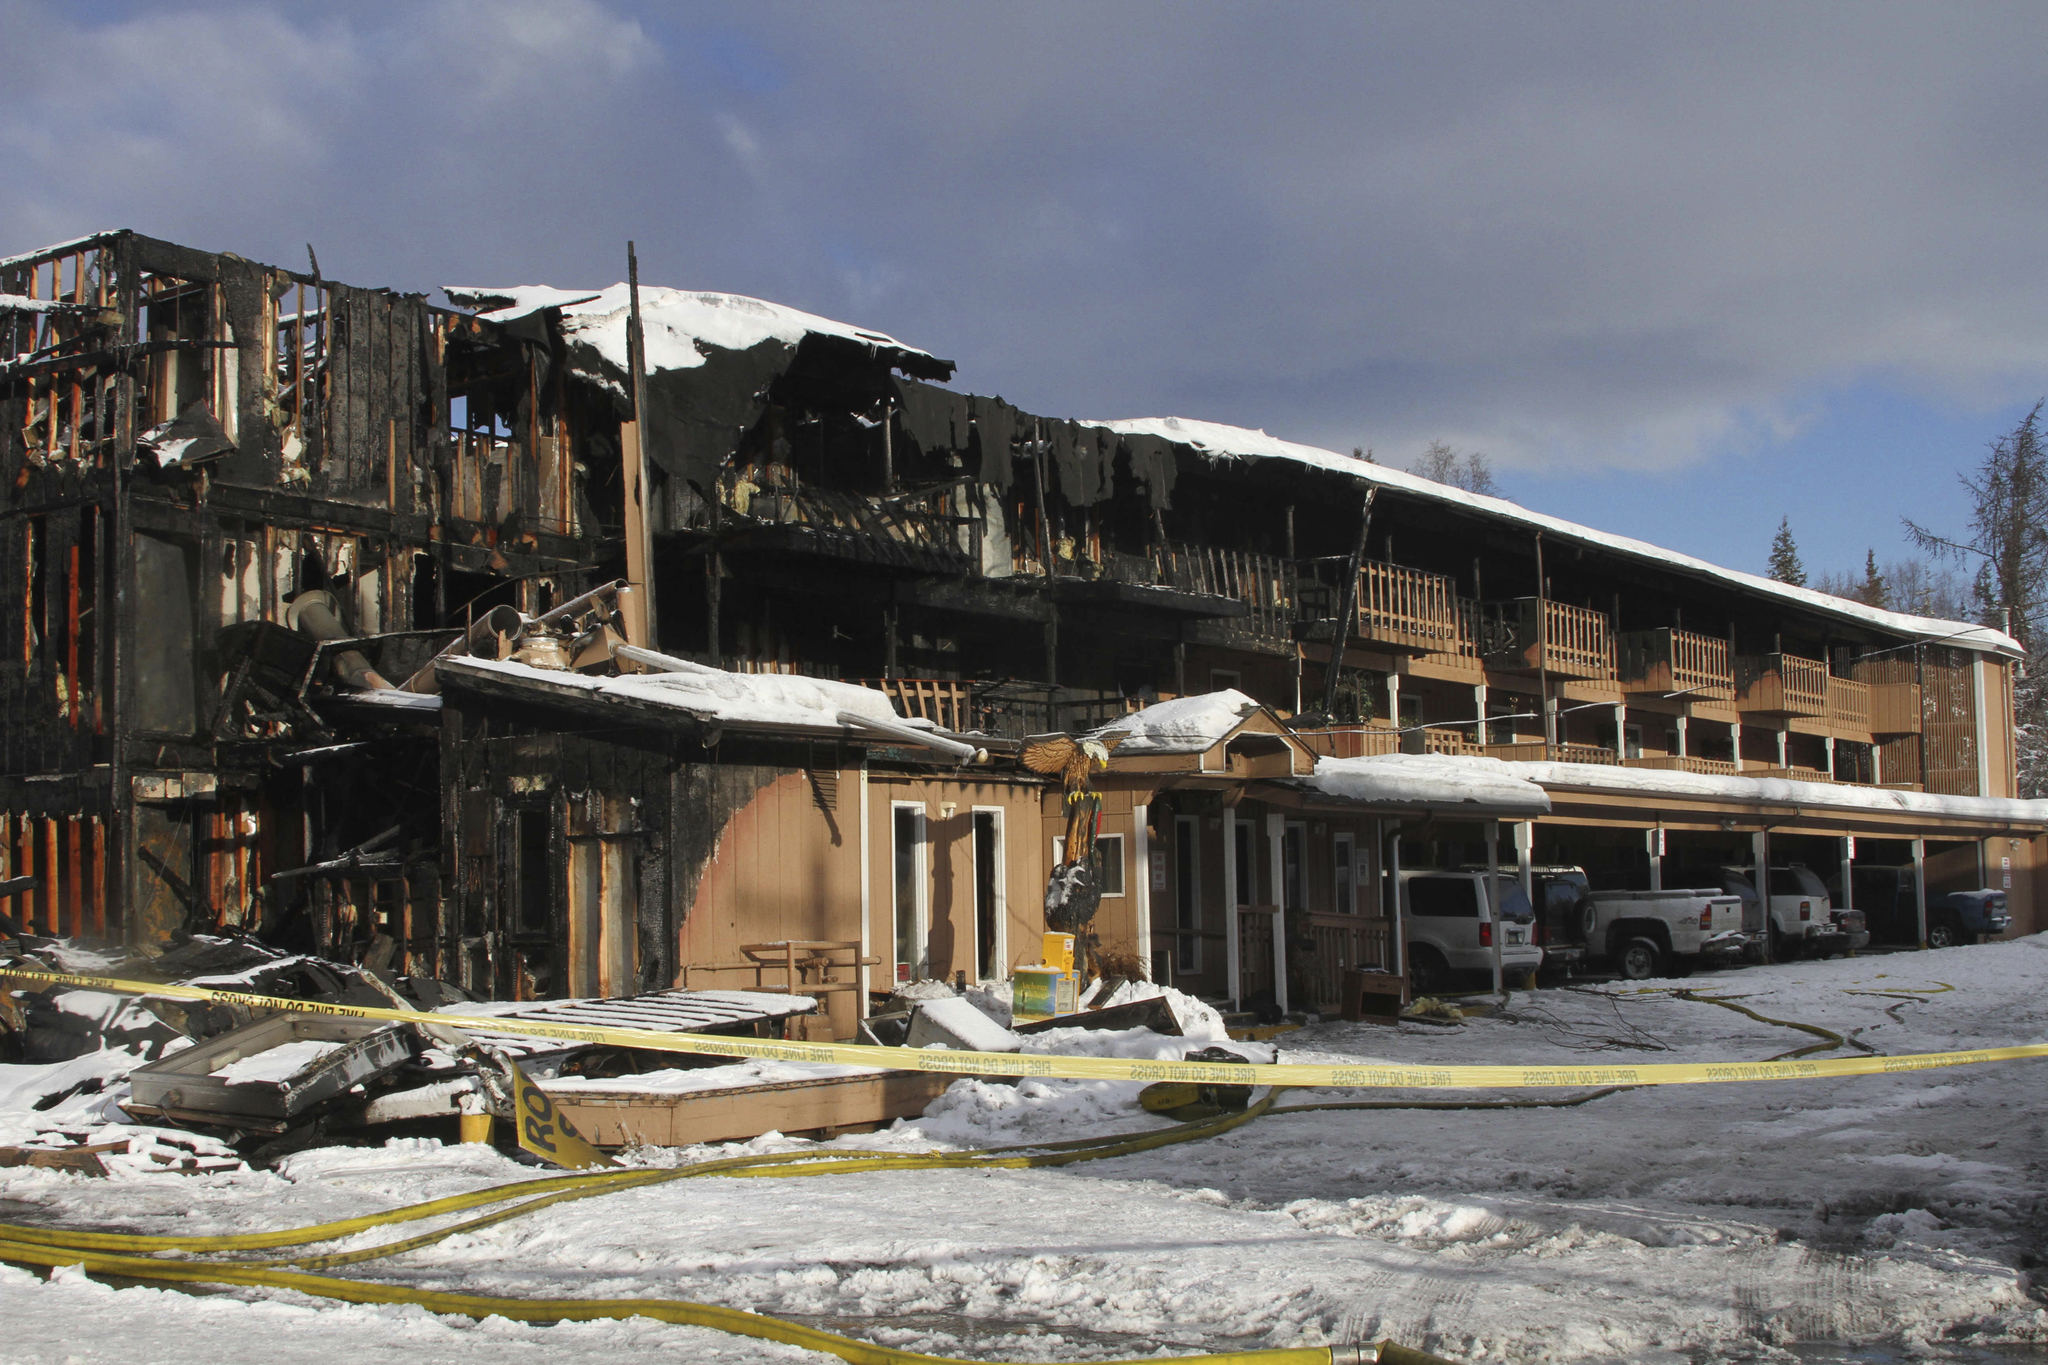 The burned remains of the Royal Suite Lodge in Anchorage are shown Wednesday after an early morning fire. Officials said several were injured in the deadly fire. The fire’s cause is under investigation. (Mark Thiessen | The Associated Press)